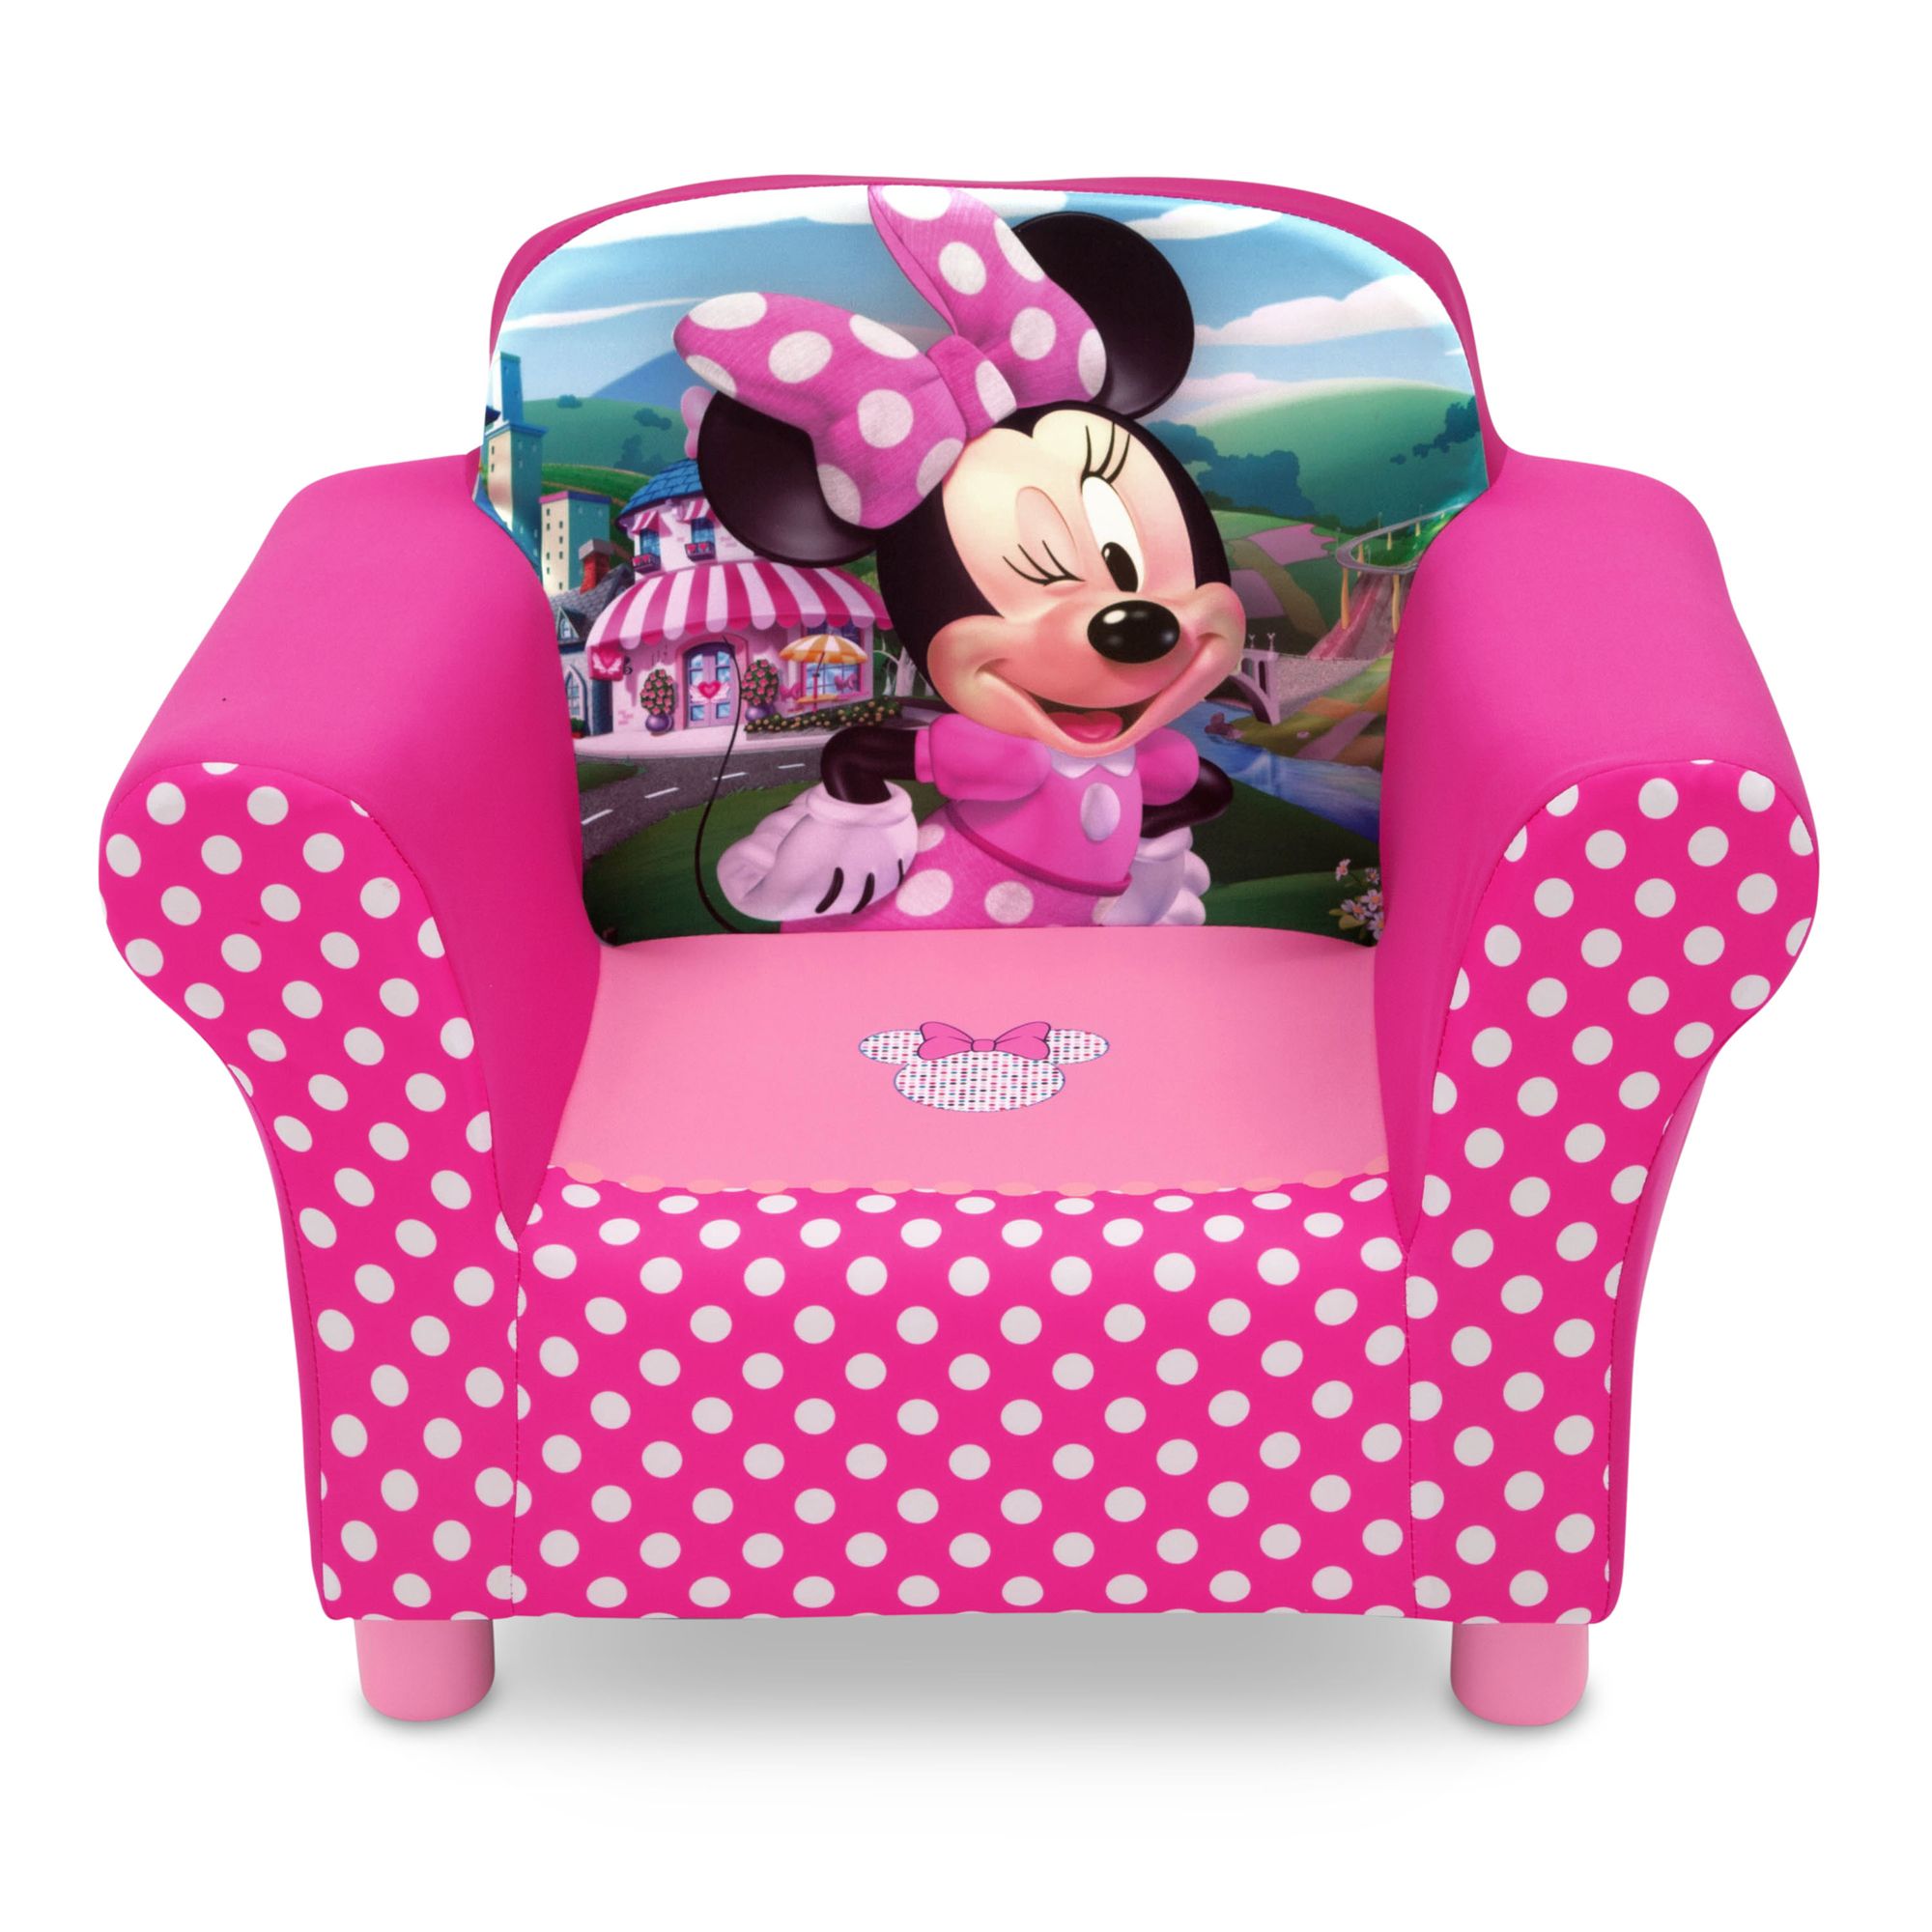 Minnie Mouse Upholstered Chair